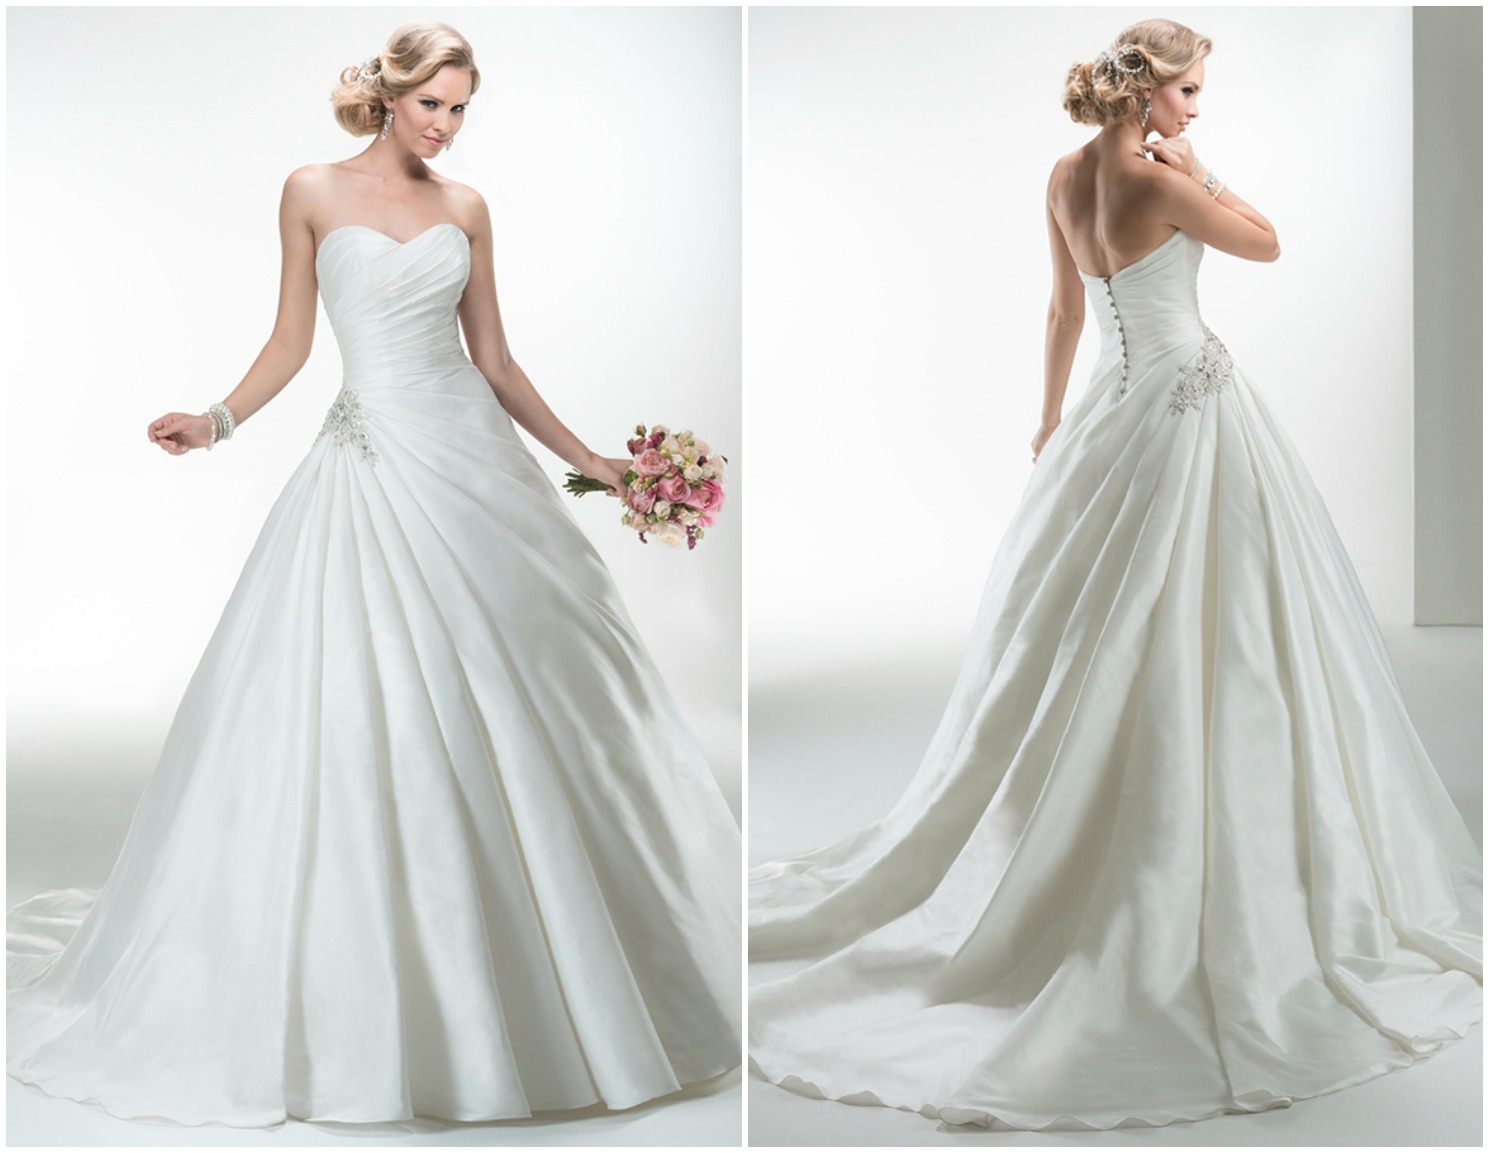 <a href="http://www.maggiesottero.com/dress.aspx?style=4MD013" target="_blank">Maggie Sottero</a>